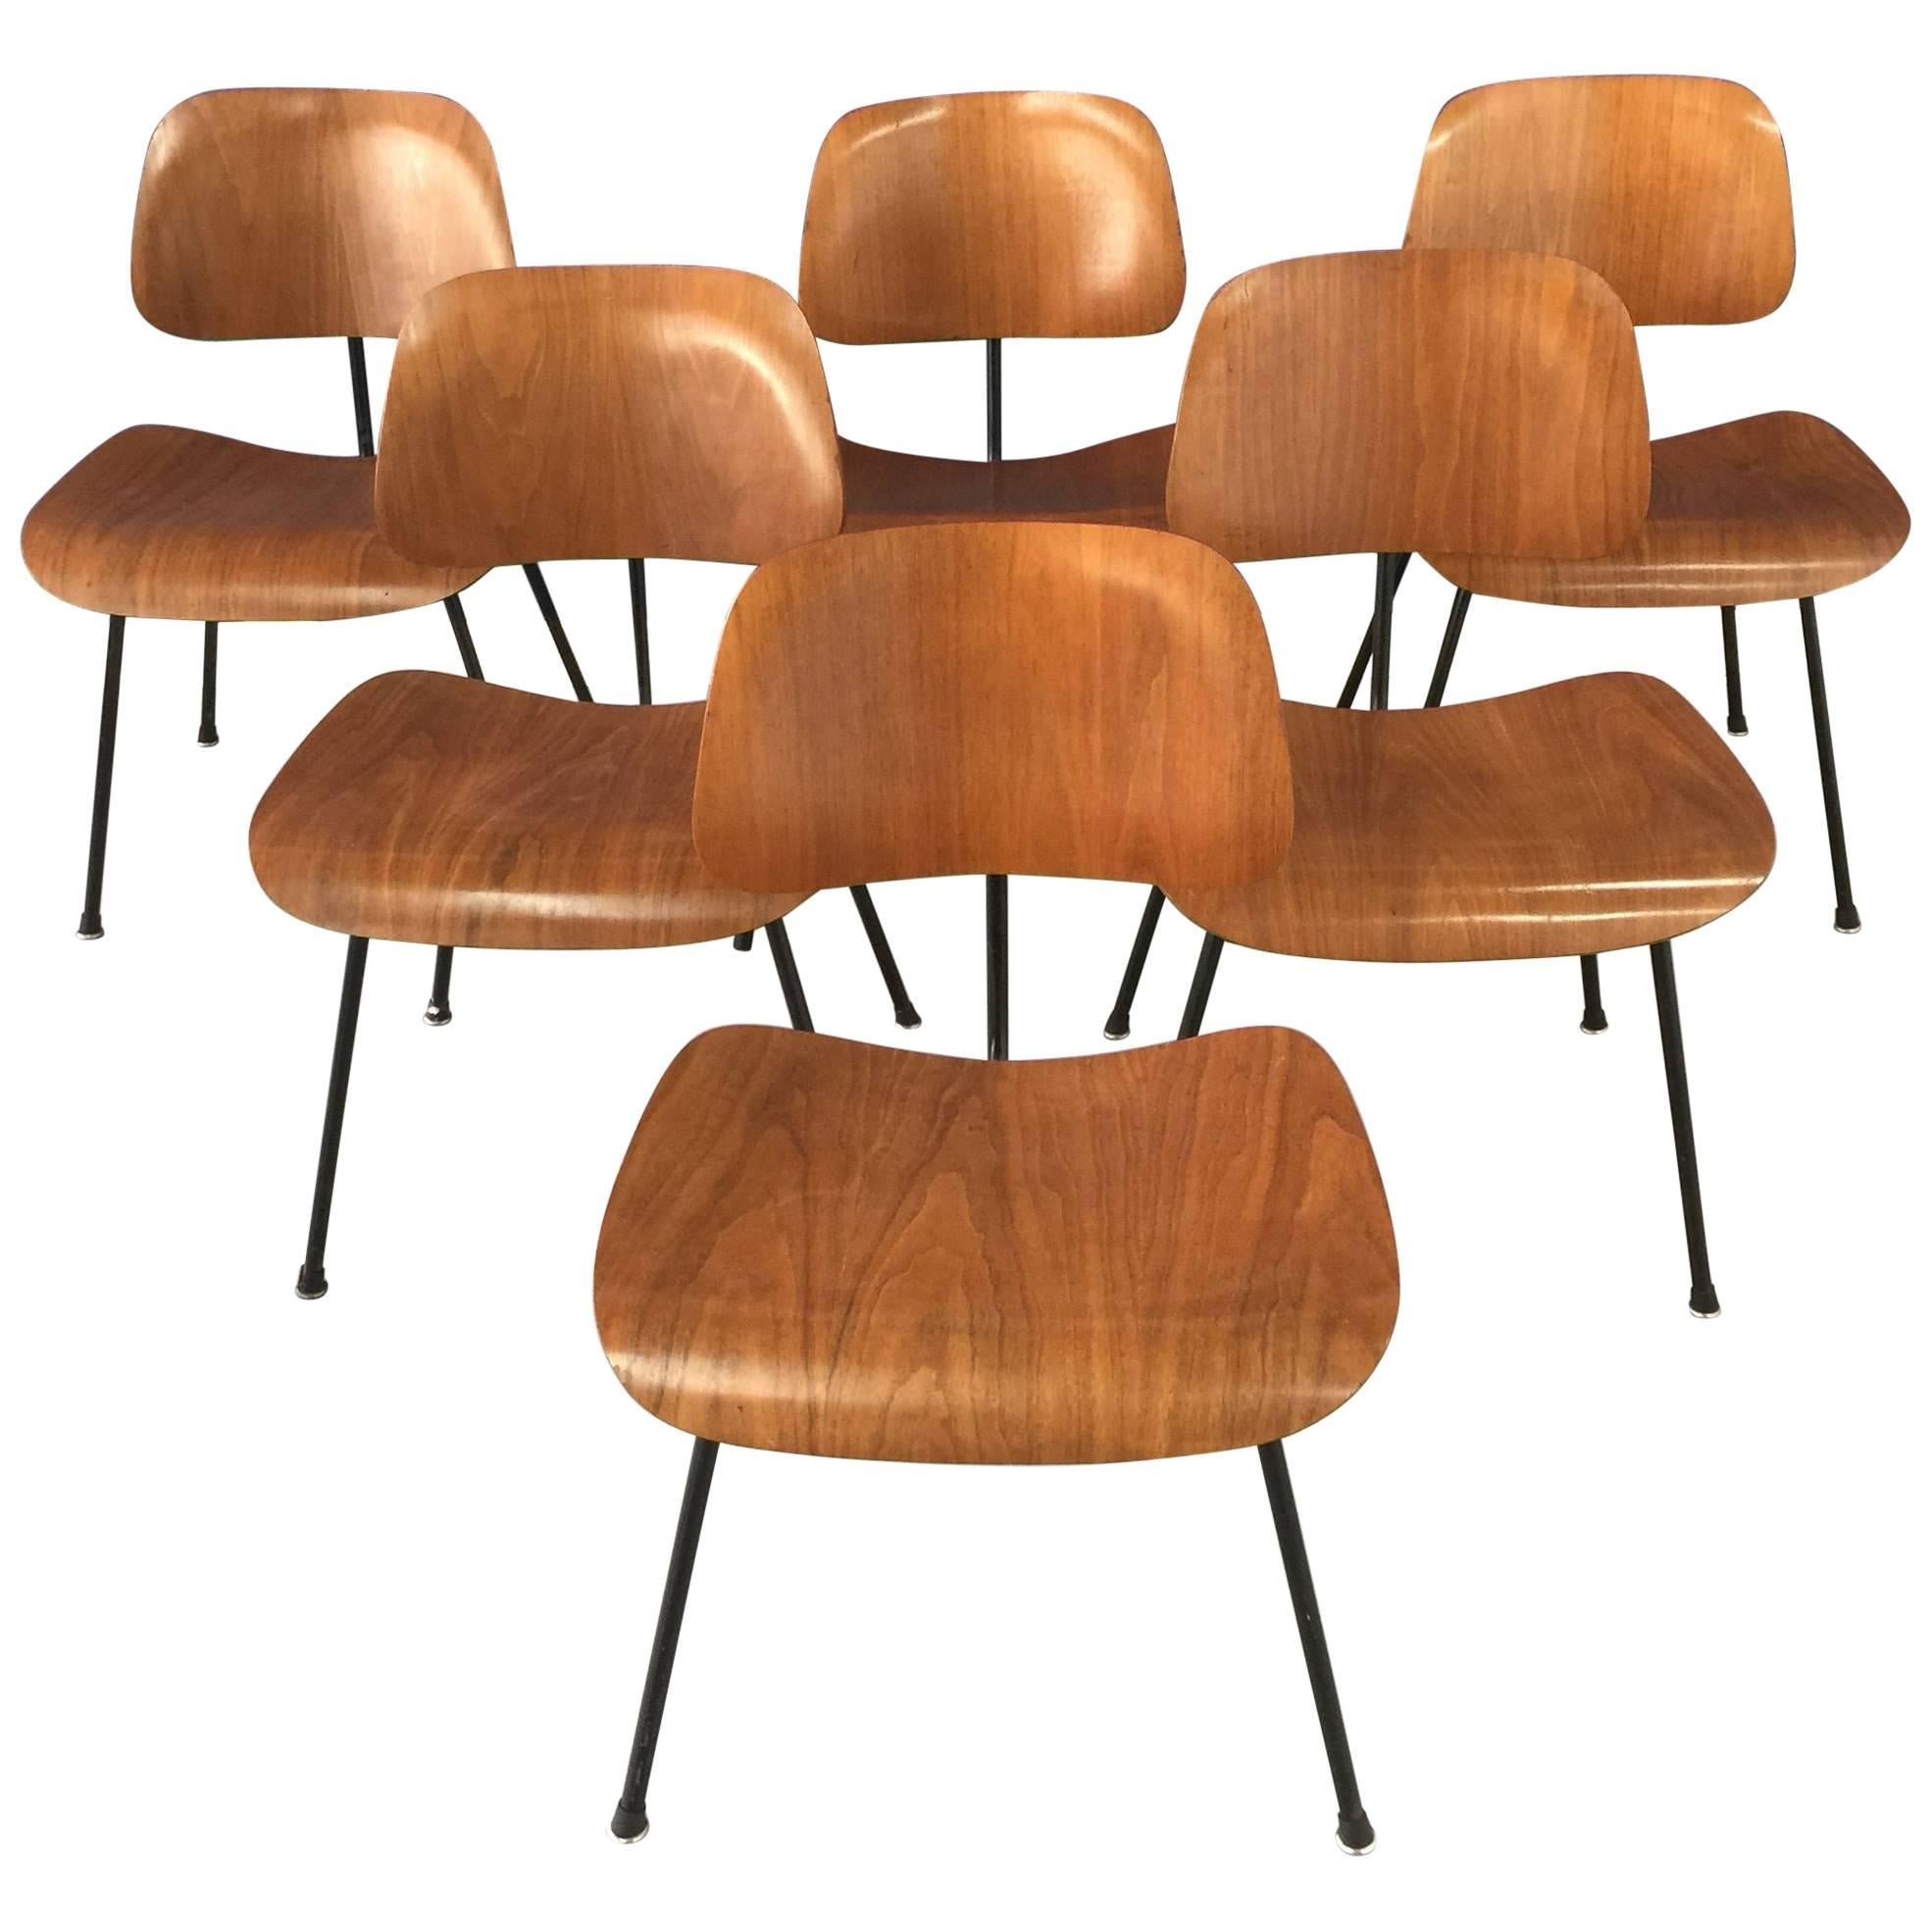 Six Early Mid-Century Modern Eames DCM Chairs